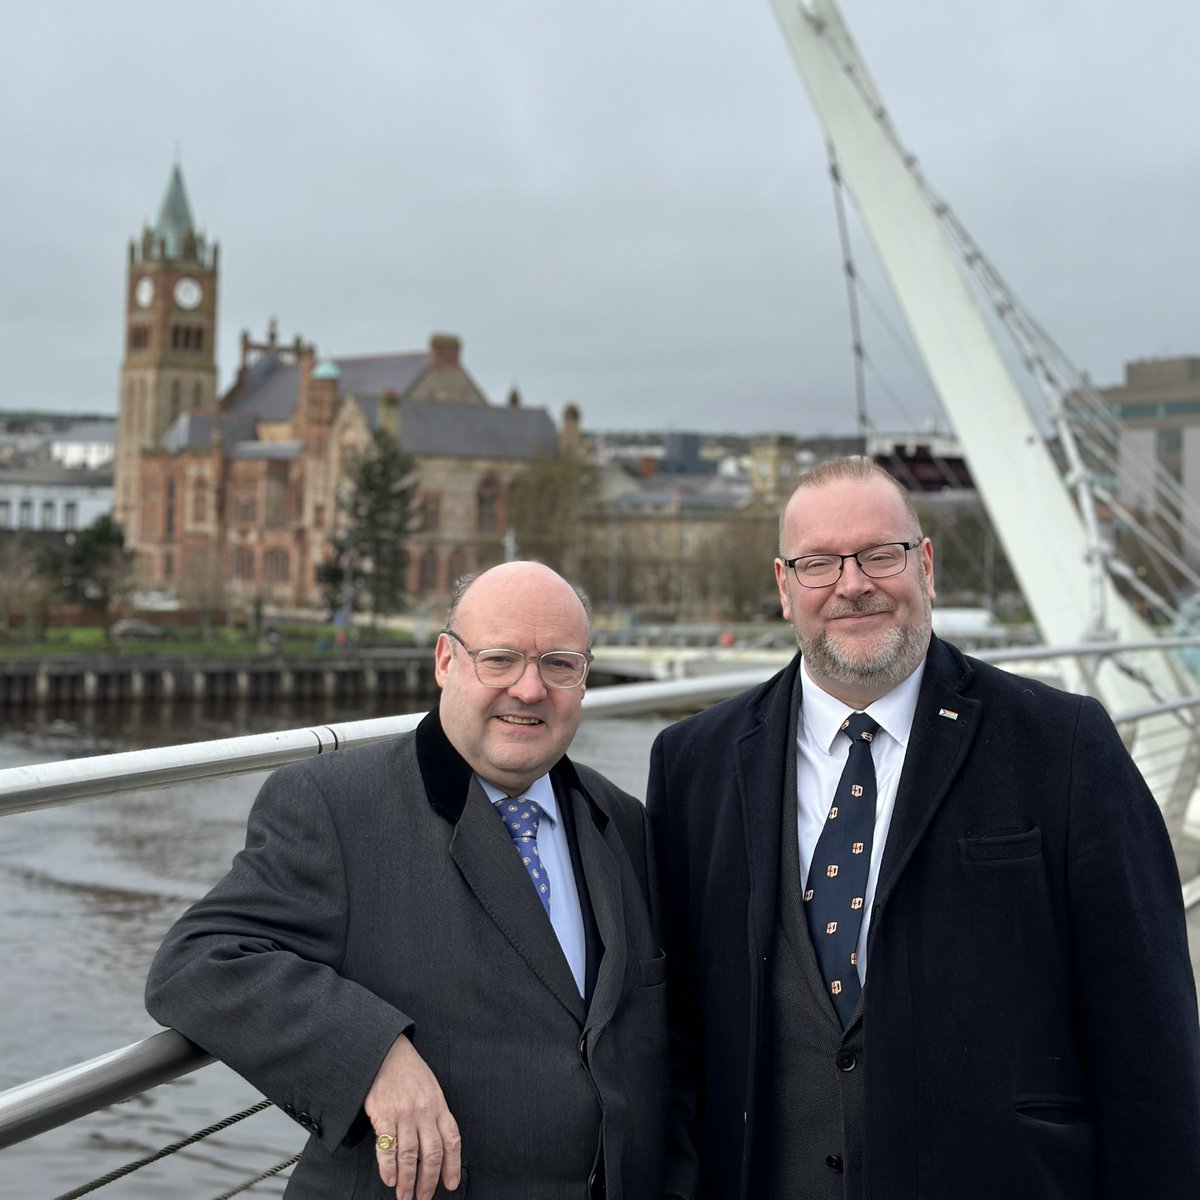 Great couple of days in Northern Ireland accompanying @cityoflondon @citypolicychair on his visit promoting the City’s Vision for Economic Growth. As Deputy Governor of @hon_irish I am very proud of the City’s historic and contemporary links to NI, especially Derry/Londonderry.